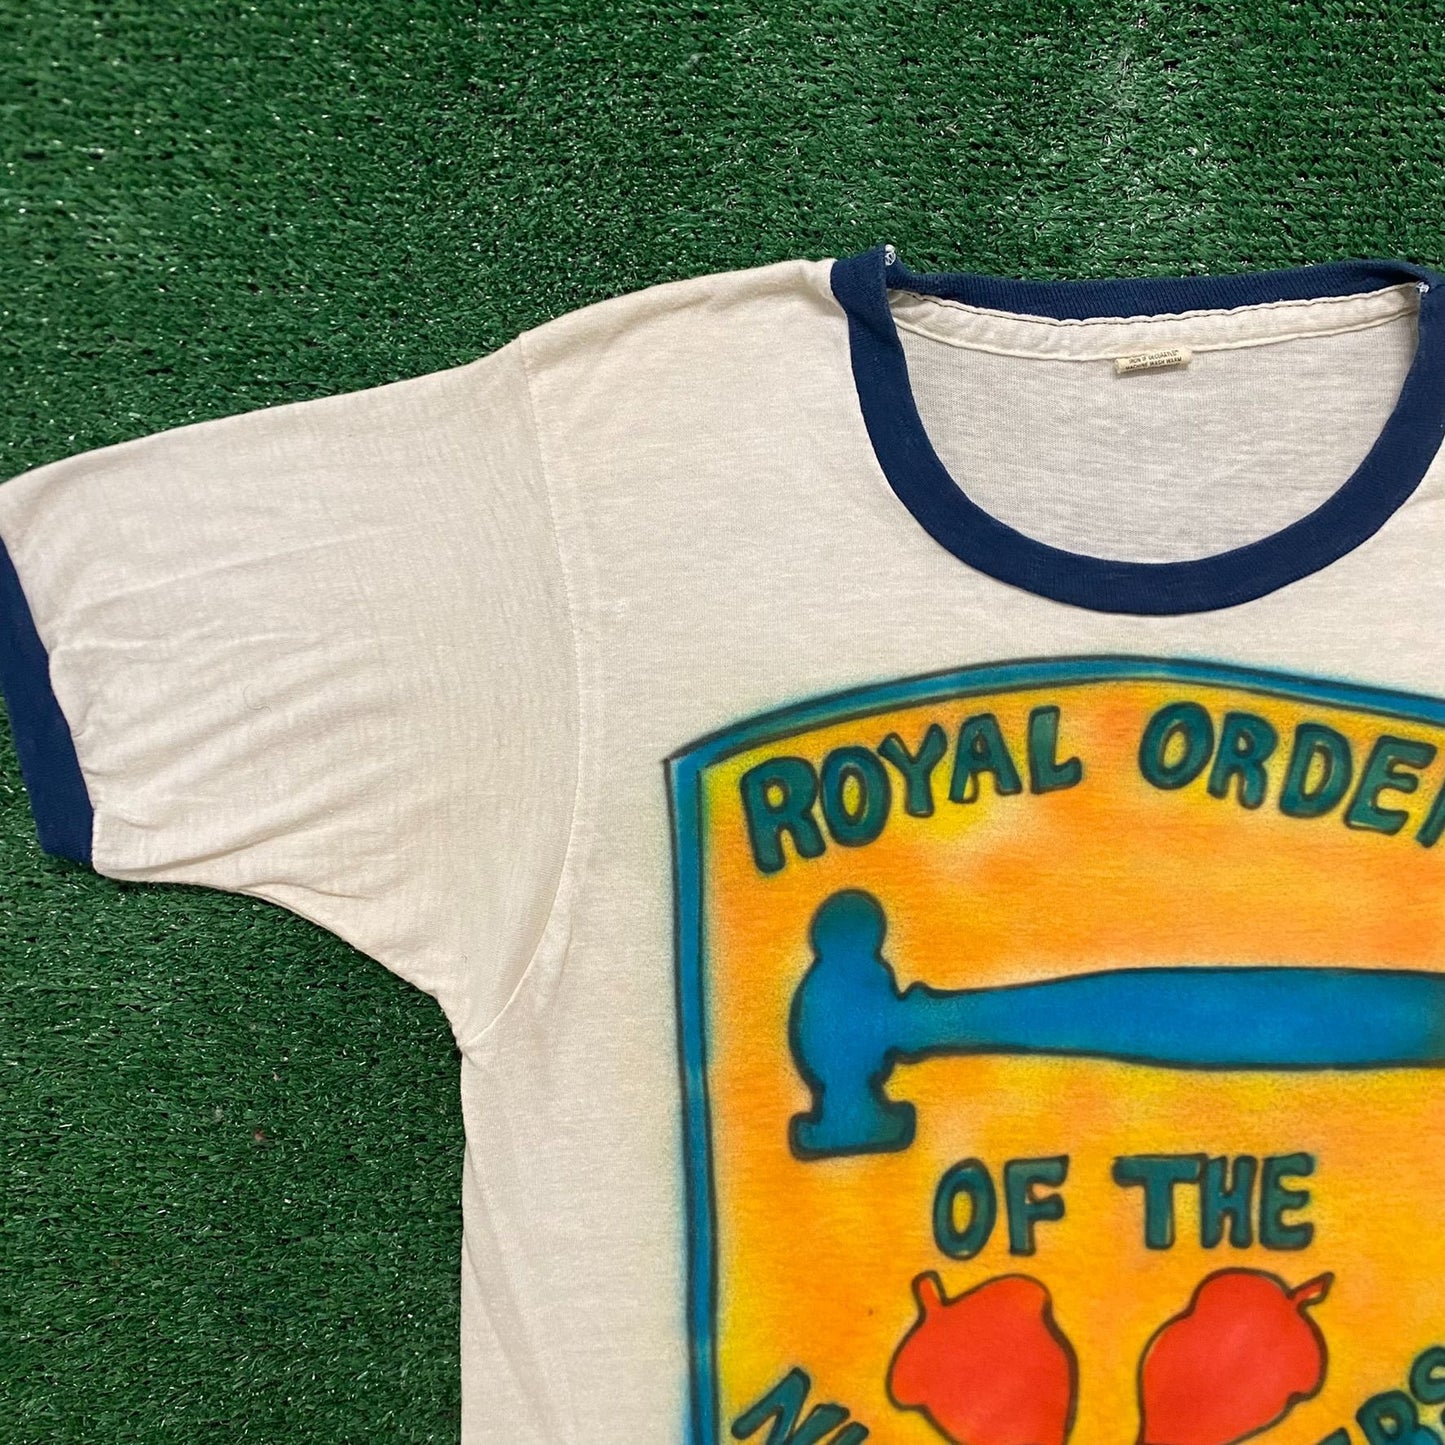 Vintage 80s Royal Nut Busters Single Stitch Funny Ringer Tee